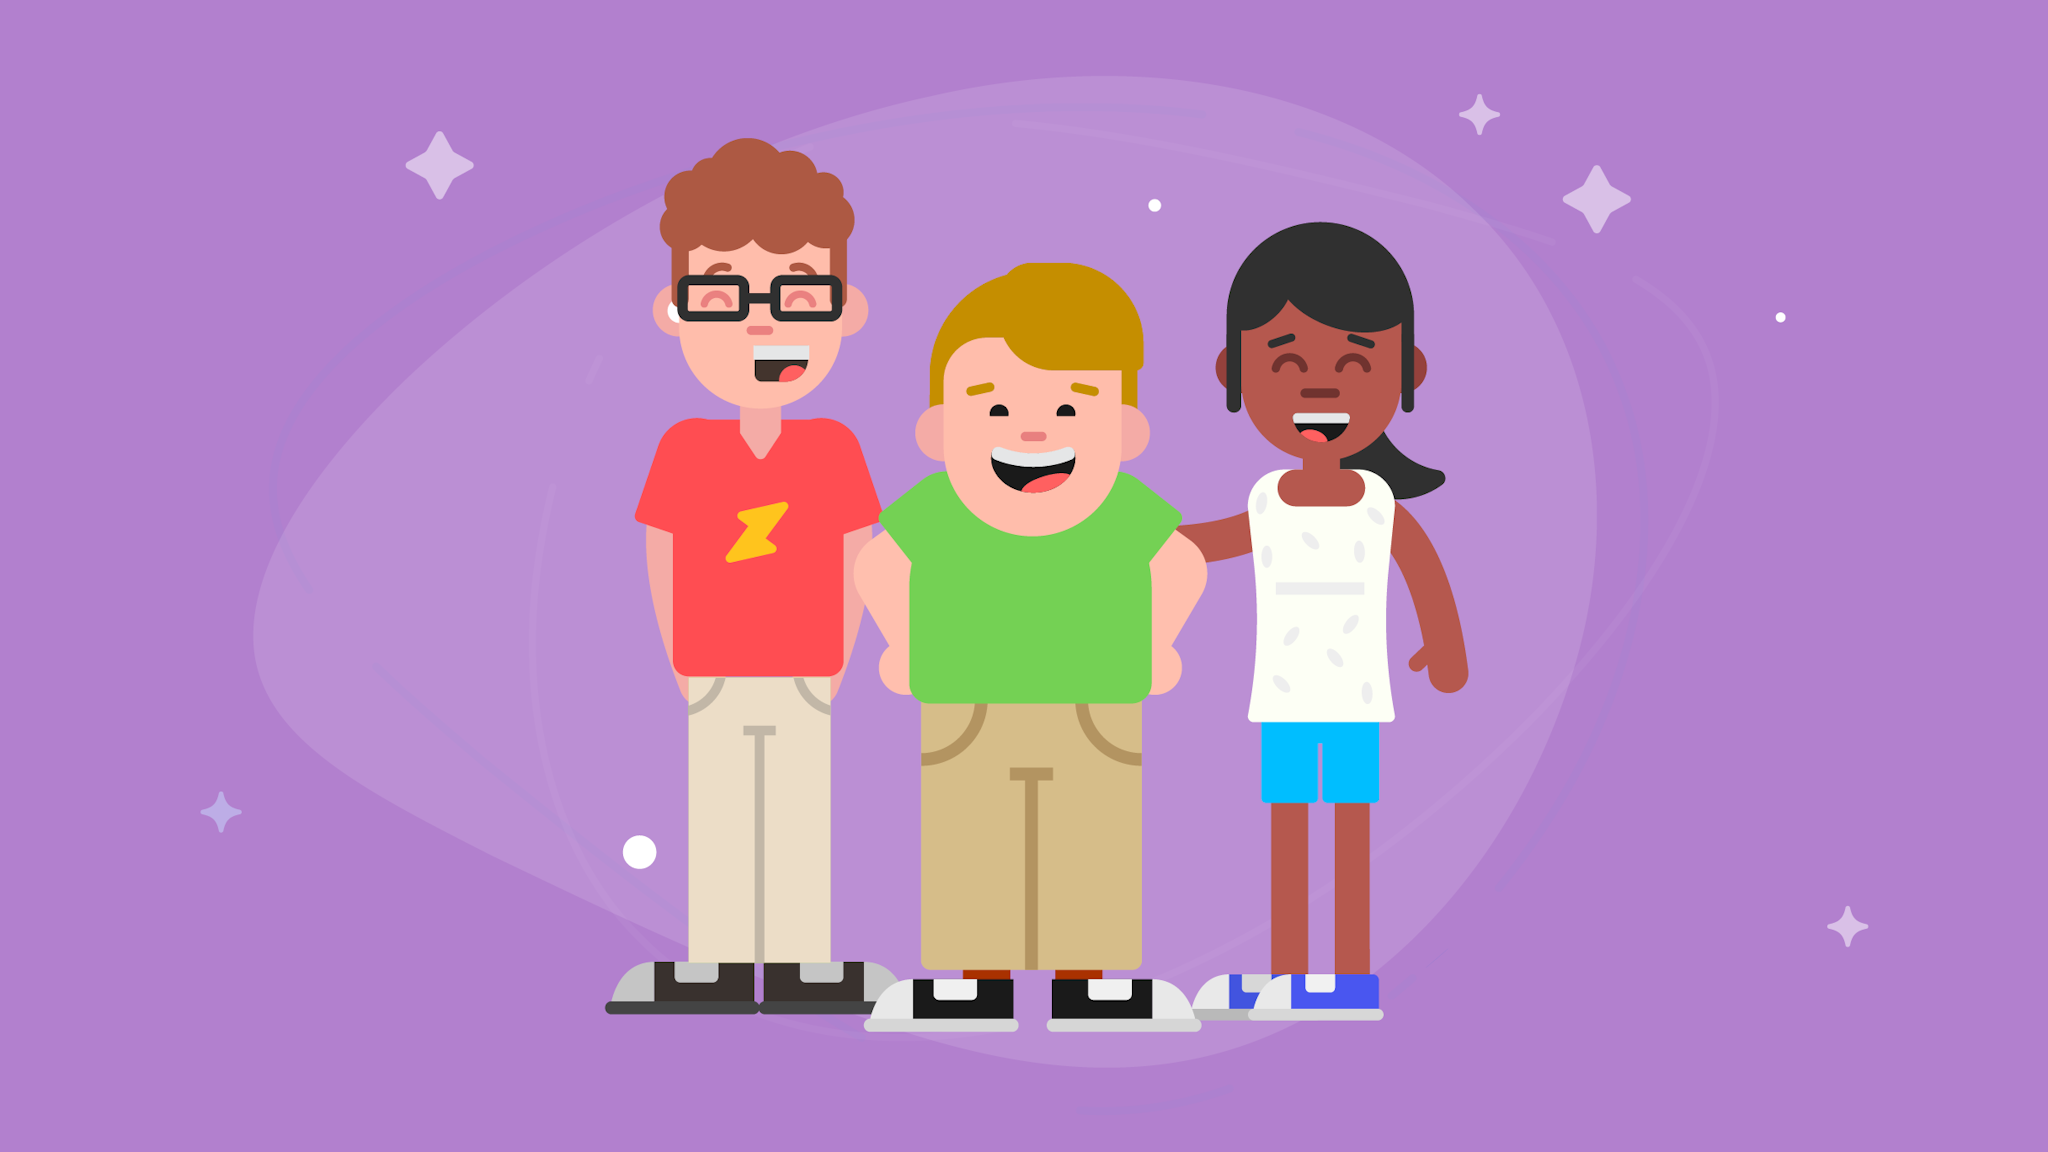 Three students standing side-by-side smiling against a purple background.